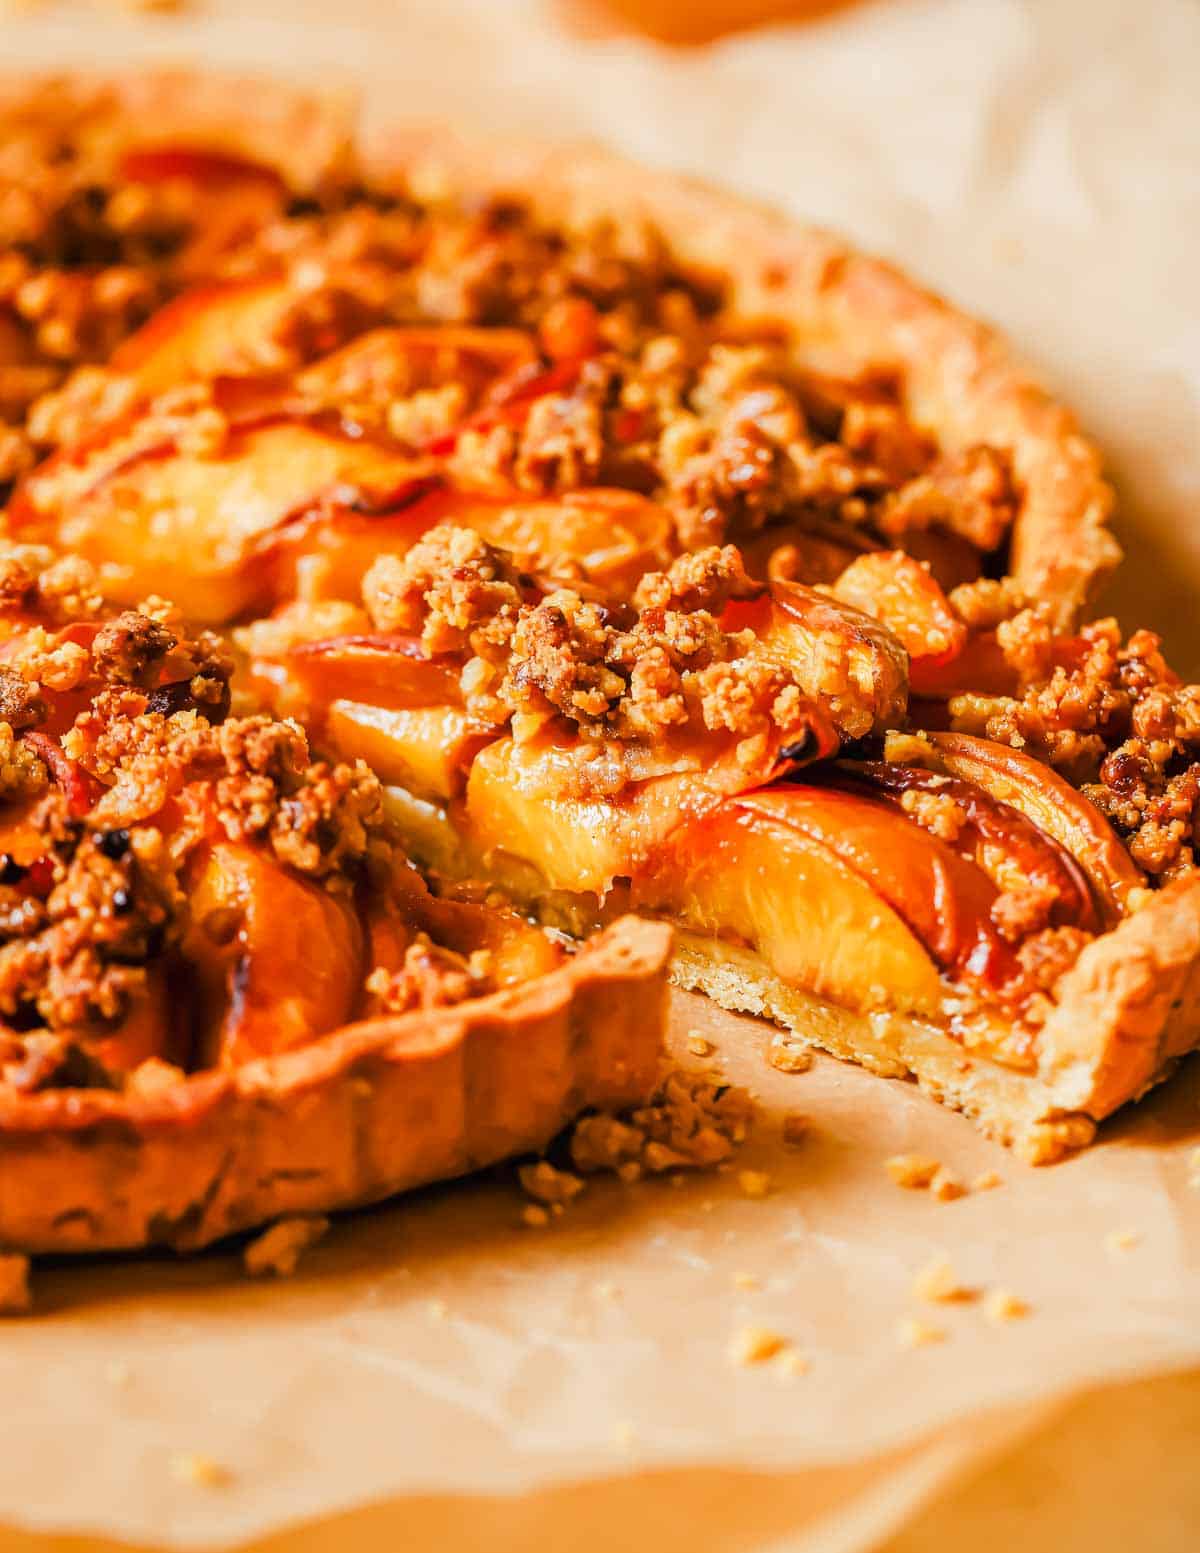 A freshly baked peach tart with a golden crust, topped with sliced peaches and streusel topping, served on parchment paper.